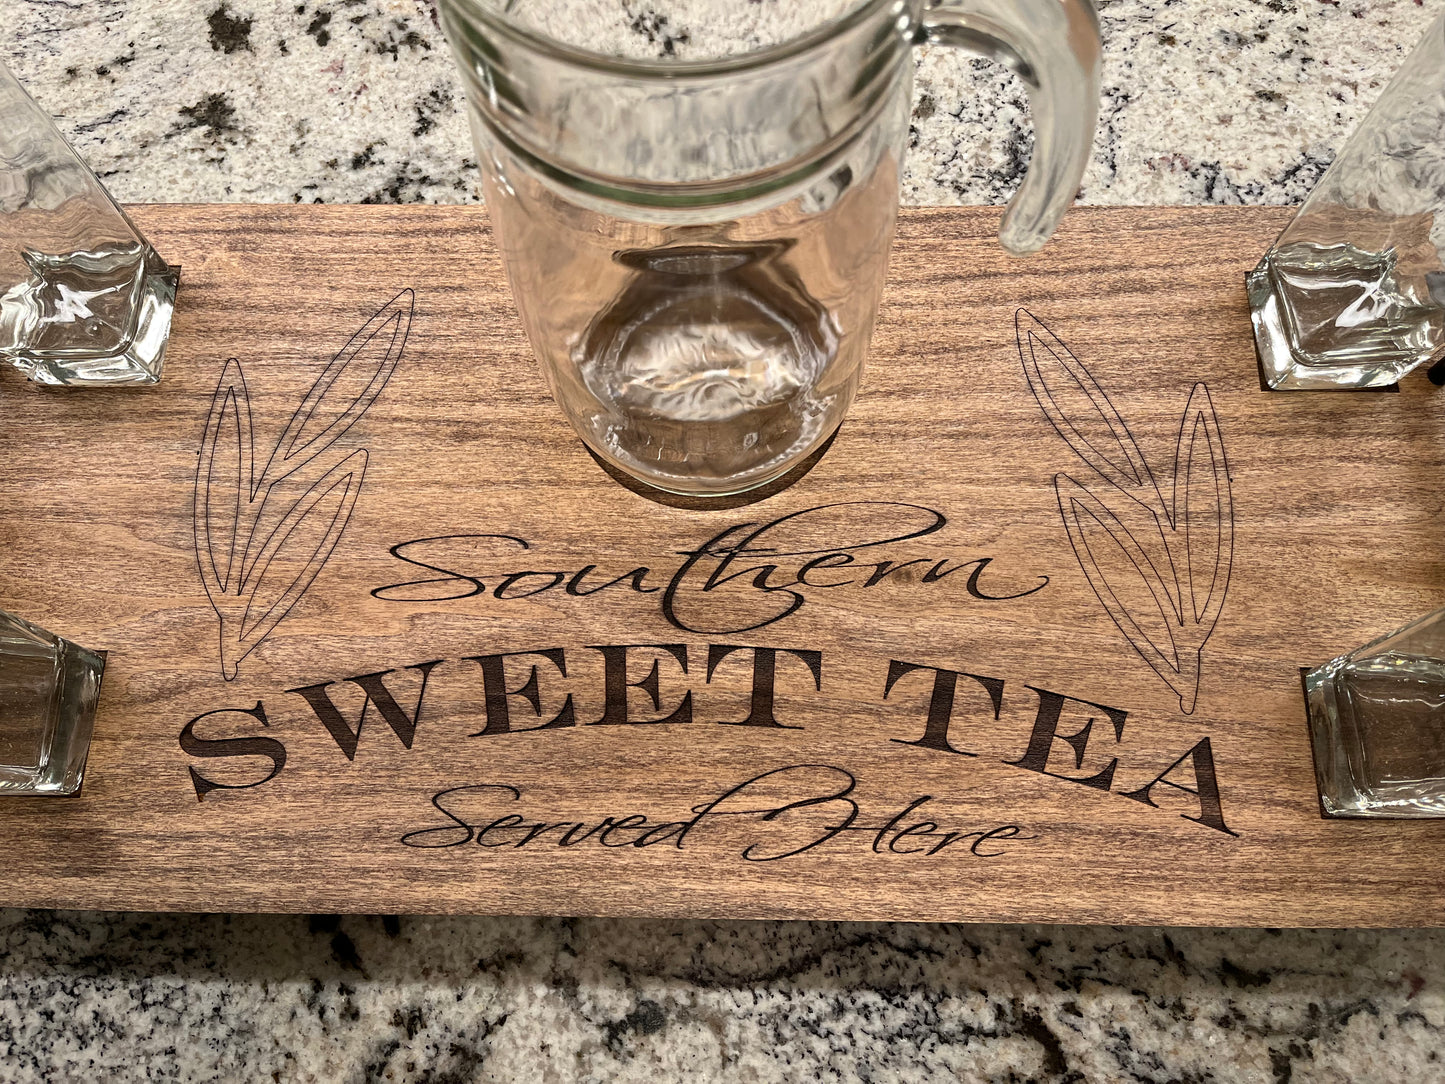 Southern Sweet Tea Served Here Tray